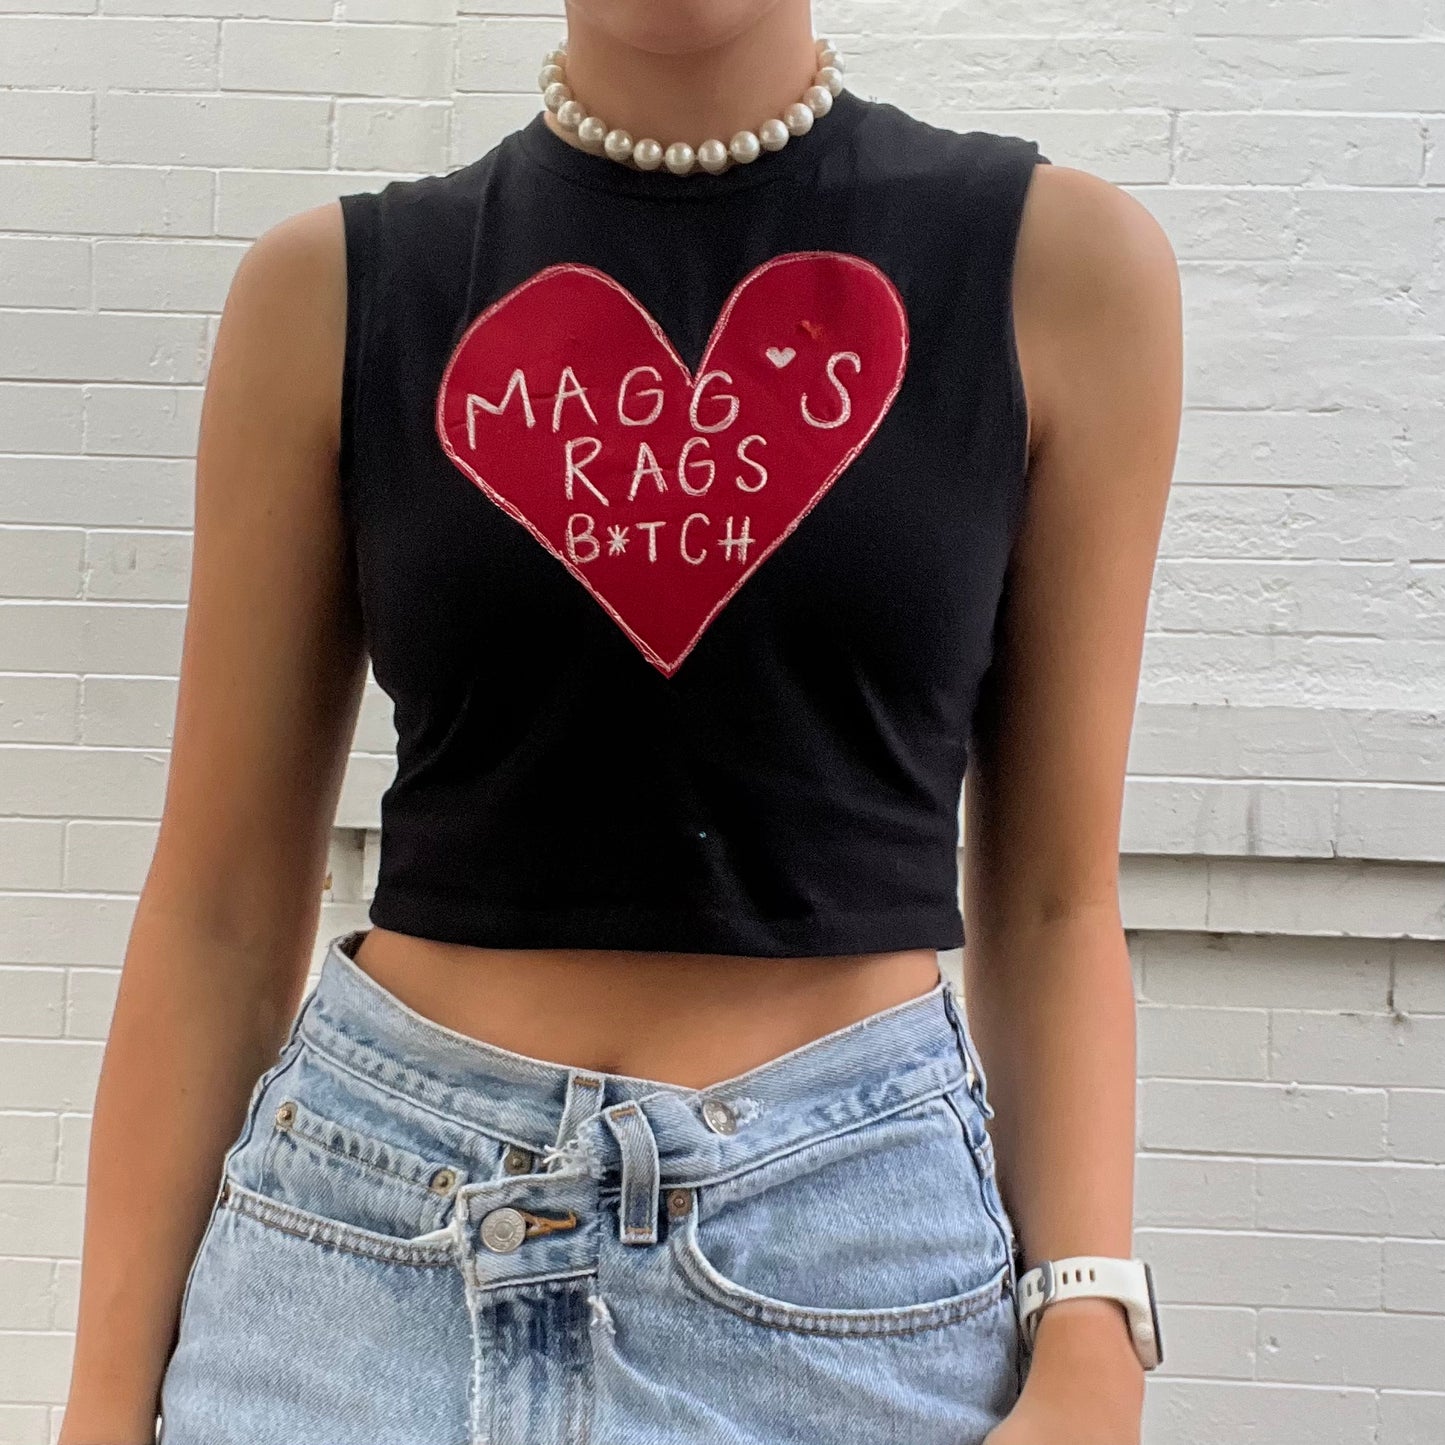 Magg’s Rags hand stitched graphic tank